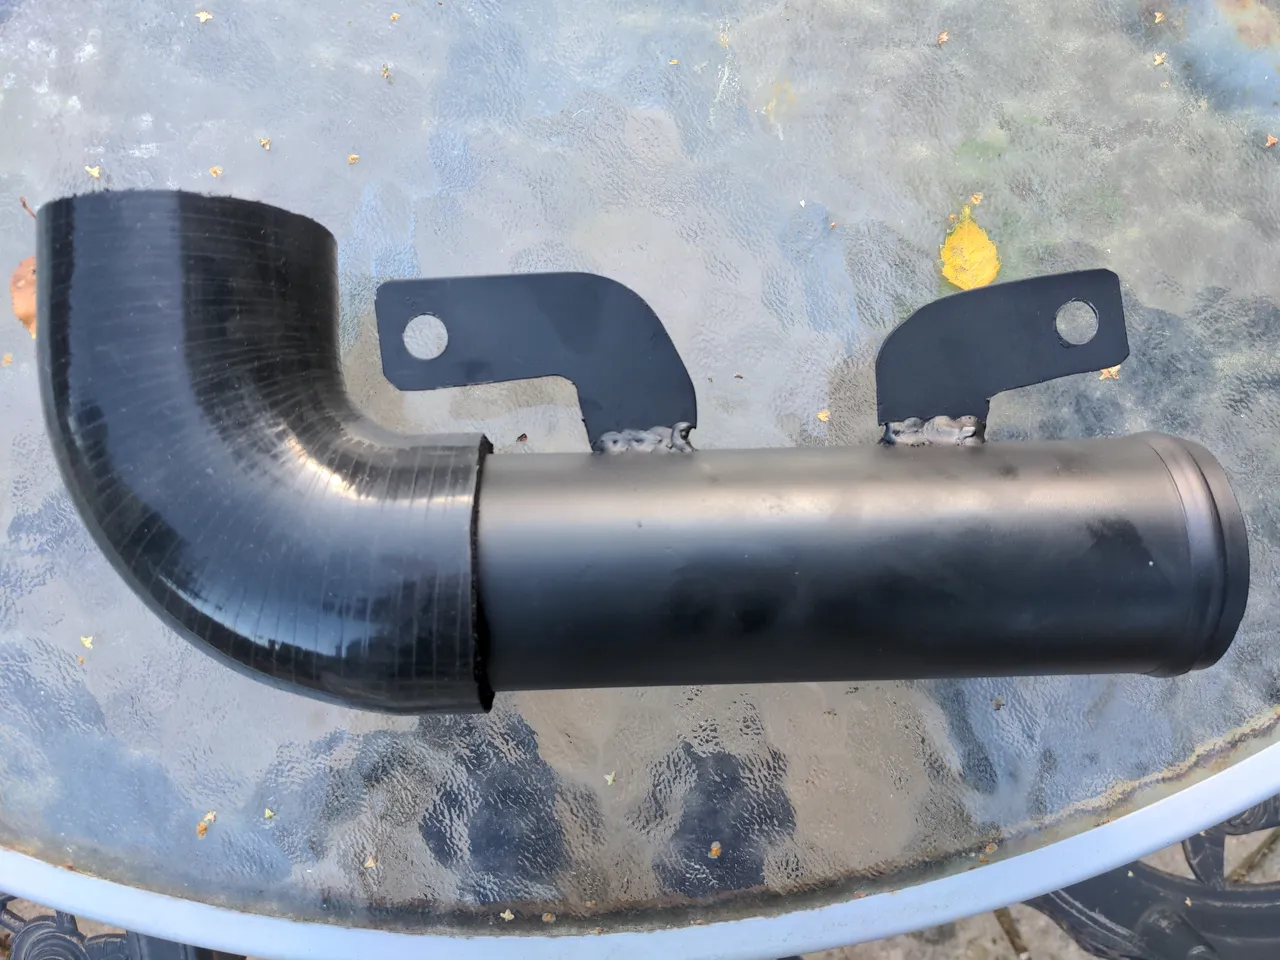 The intake pipe with its 90 degree silicone bendy bit.